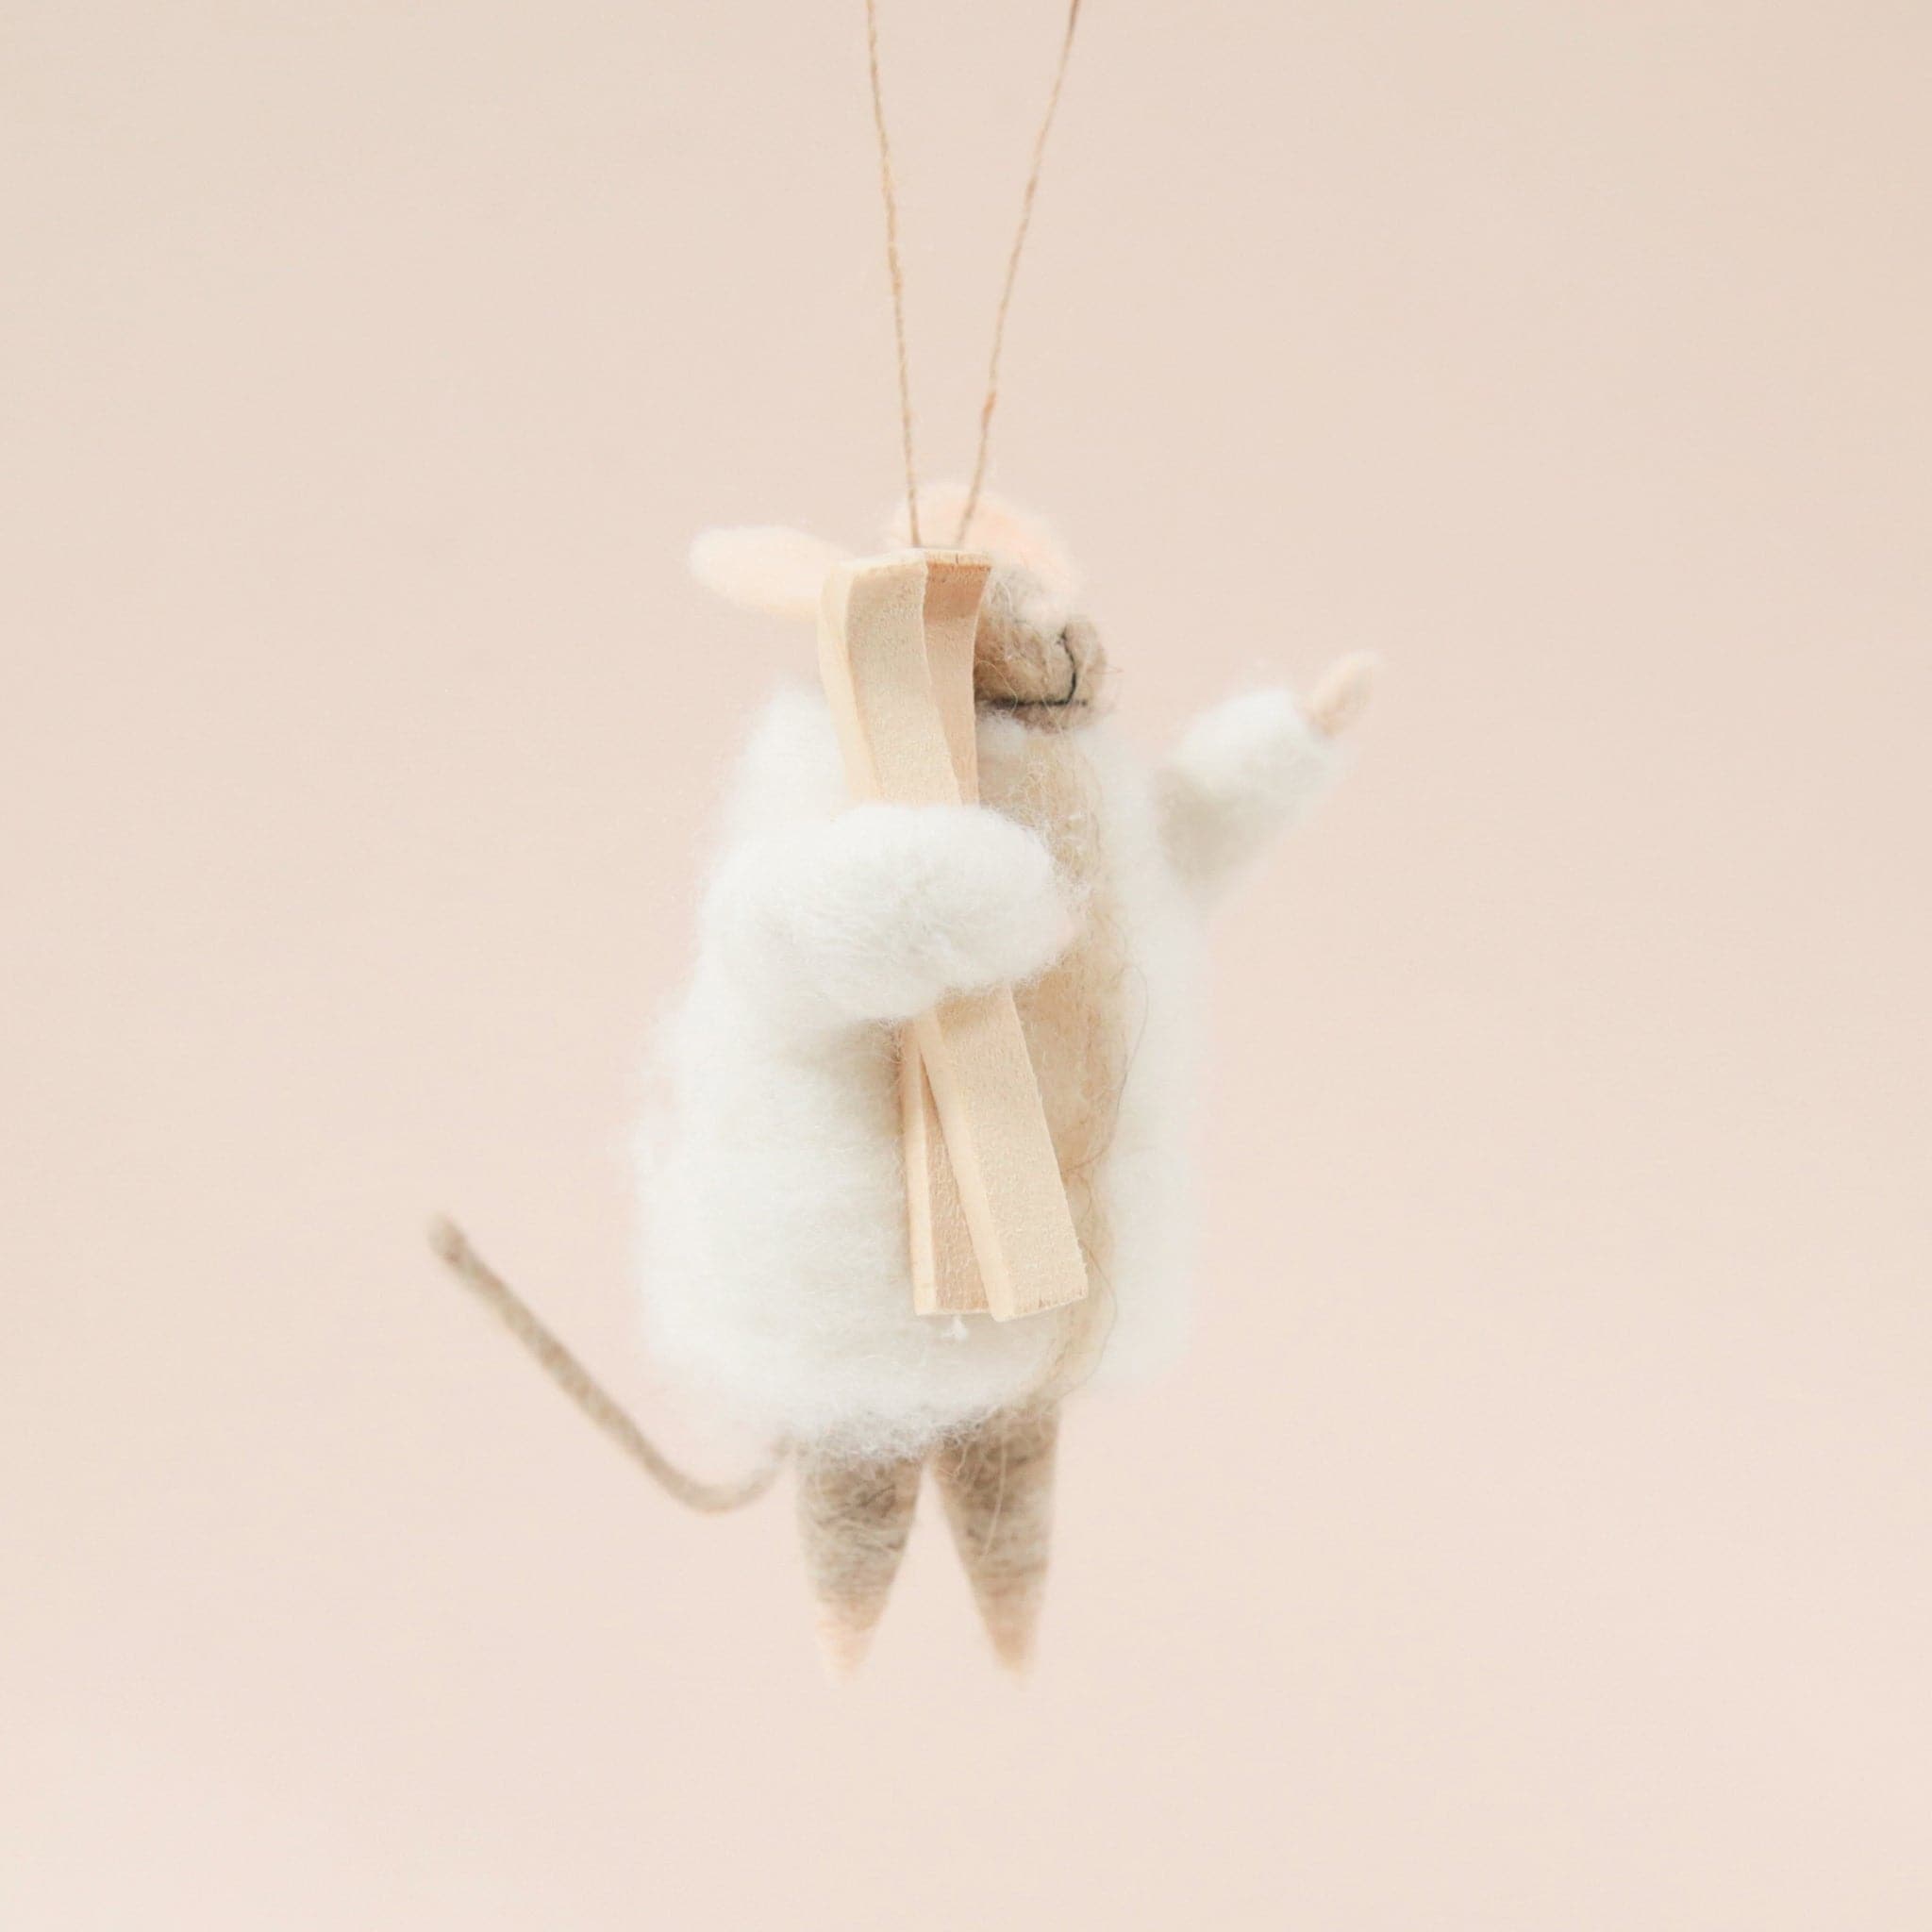 On a light tan background is a brown felt mouse ornament with a white jacket and a pair of a wood skis.